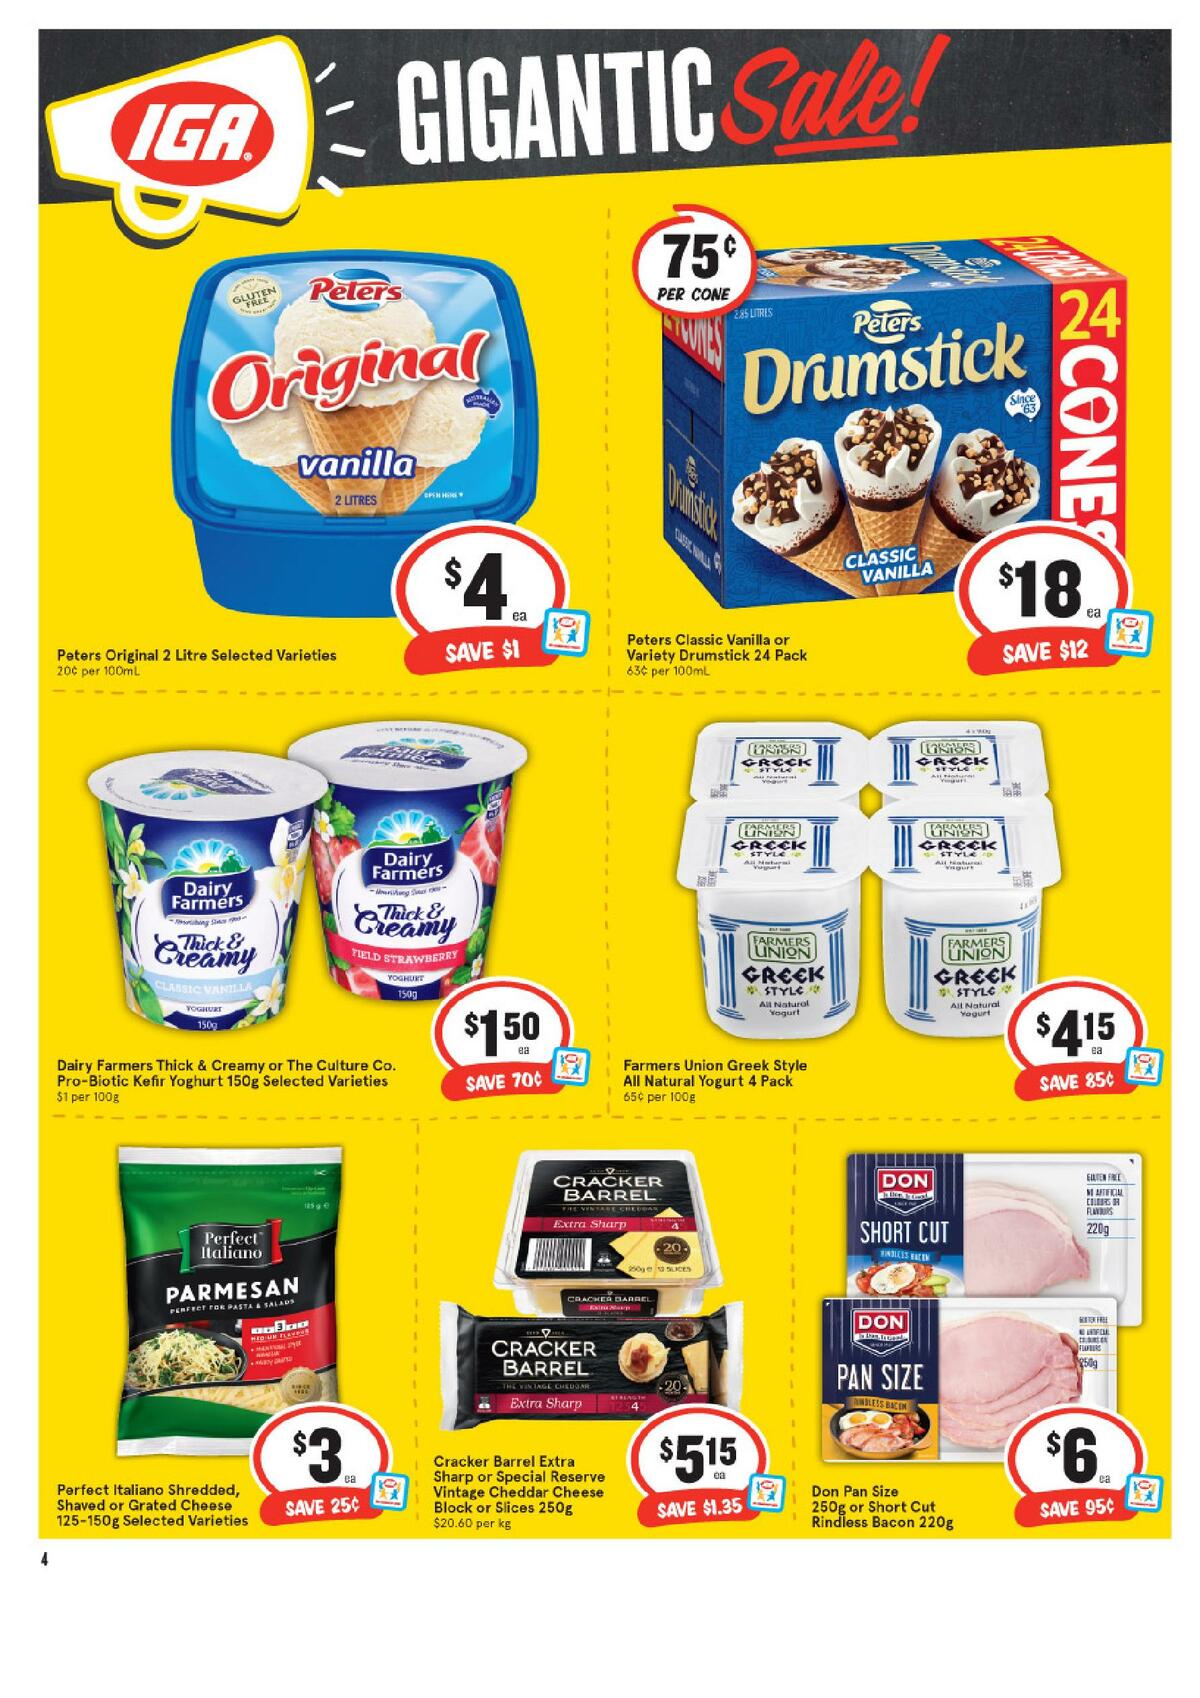 IGA Catalogues from 23 June